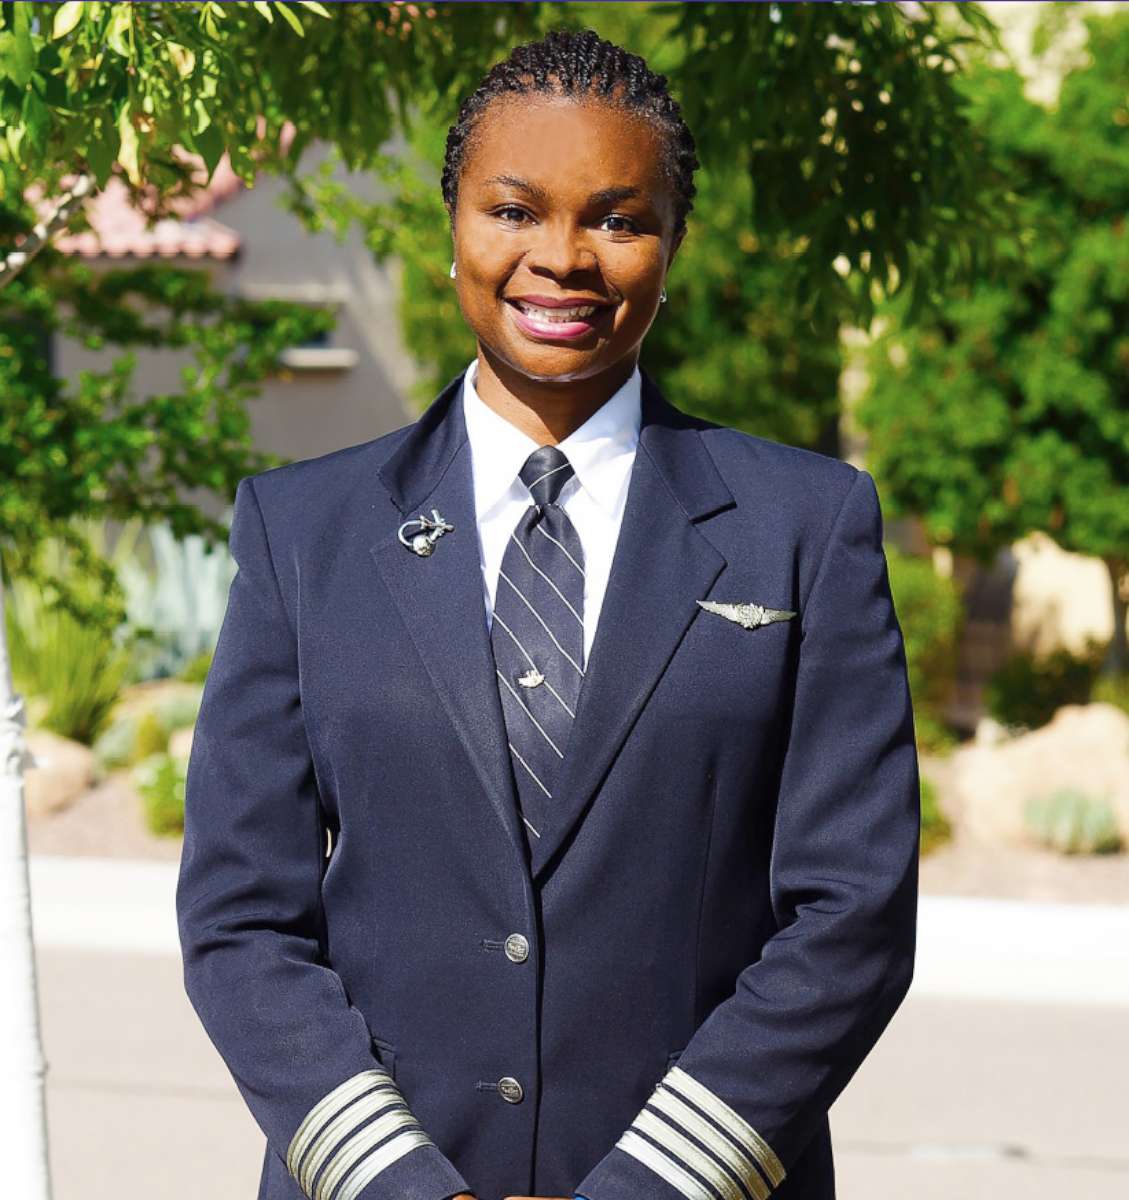 PHOTO: FedEx posted this image of Tahirah Brown, FedEx's first African American female pilot, on their website, in this undated photo.